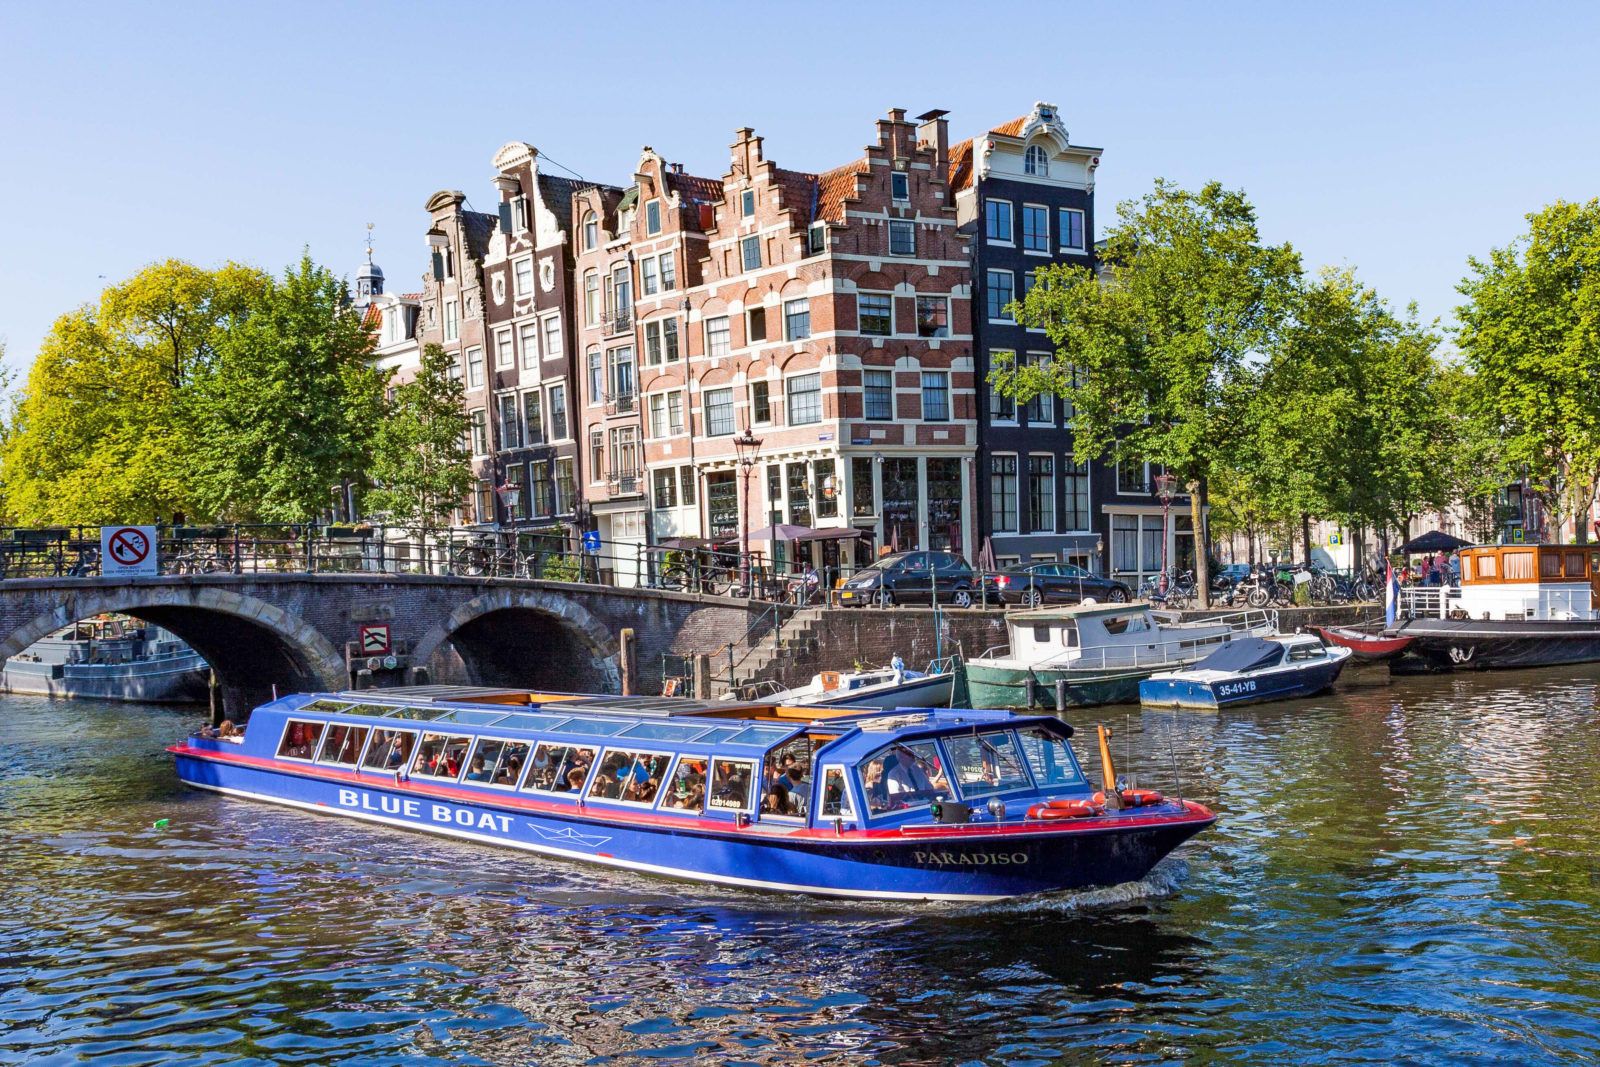 Wheelchairfriendly canal cruise in Amsterdam Amsterdam Canal Cruises